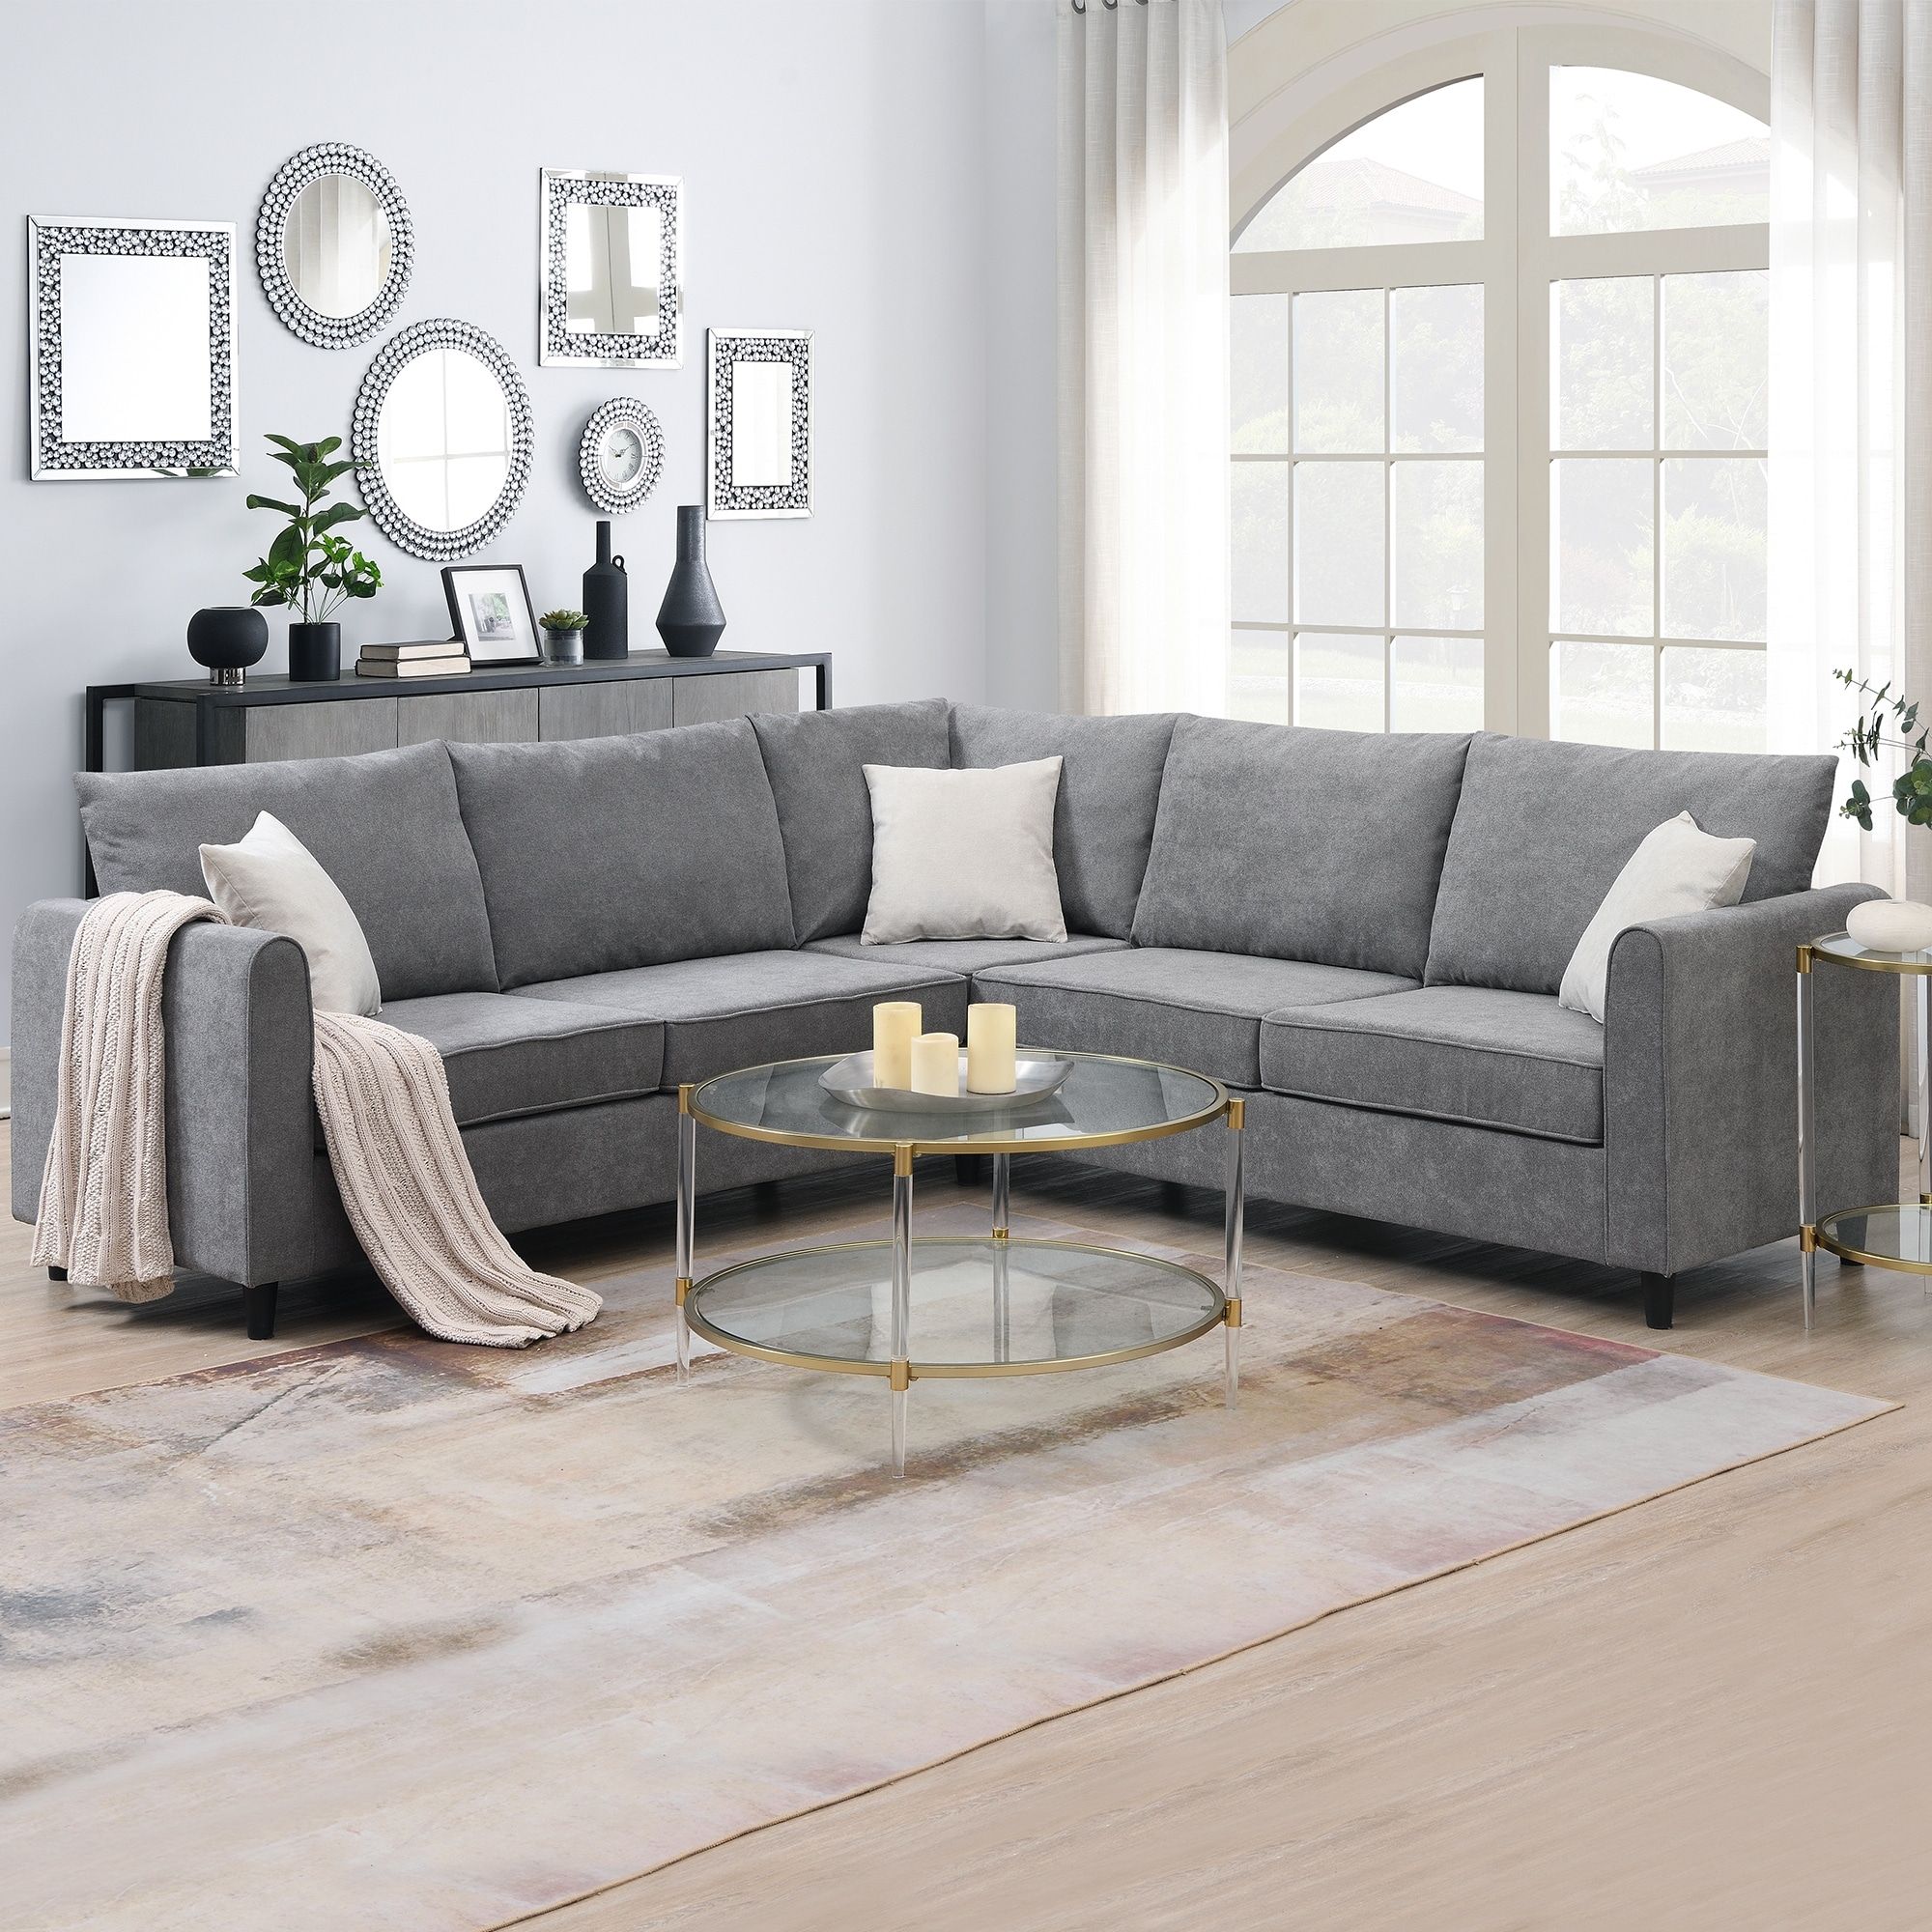 91" Modern L Shape Sectional Sofa Sets Fabric Upholstered Couch Sets For  Living Room With 3 Throw Pillows And Wood Frame – On Sale – Bed Bath &  Beyond – 38185590 With Regard To Modern L Shaped Sofa Sectionals (View 12 of 13)